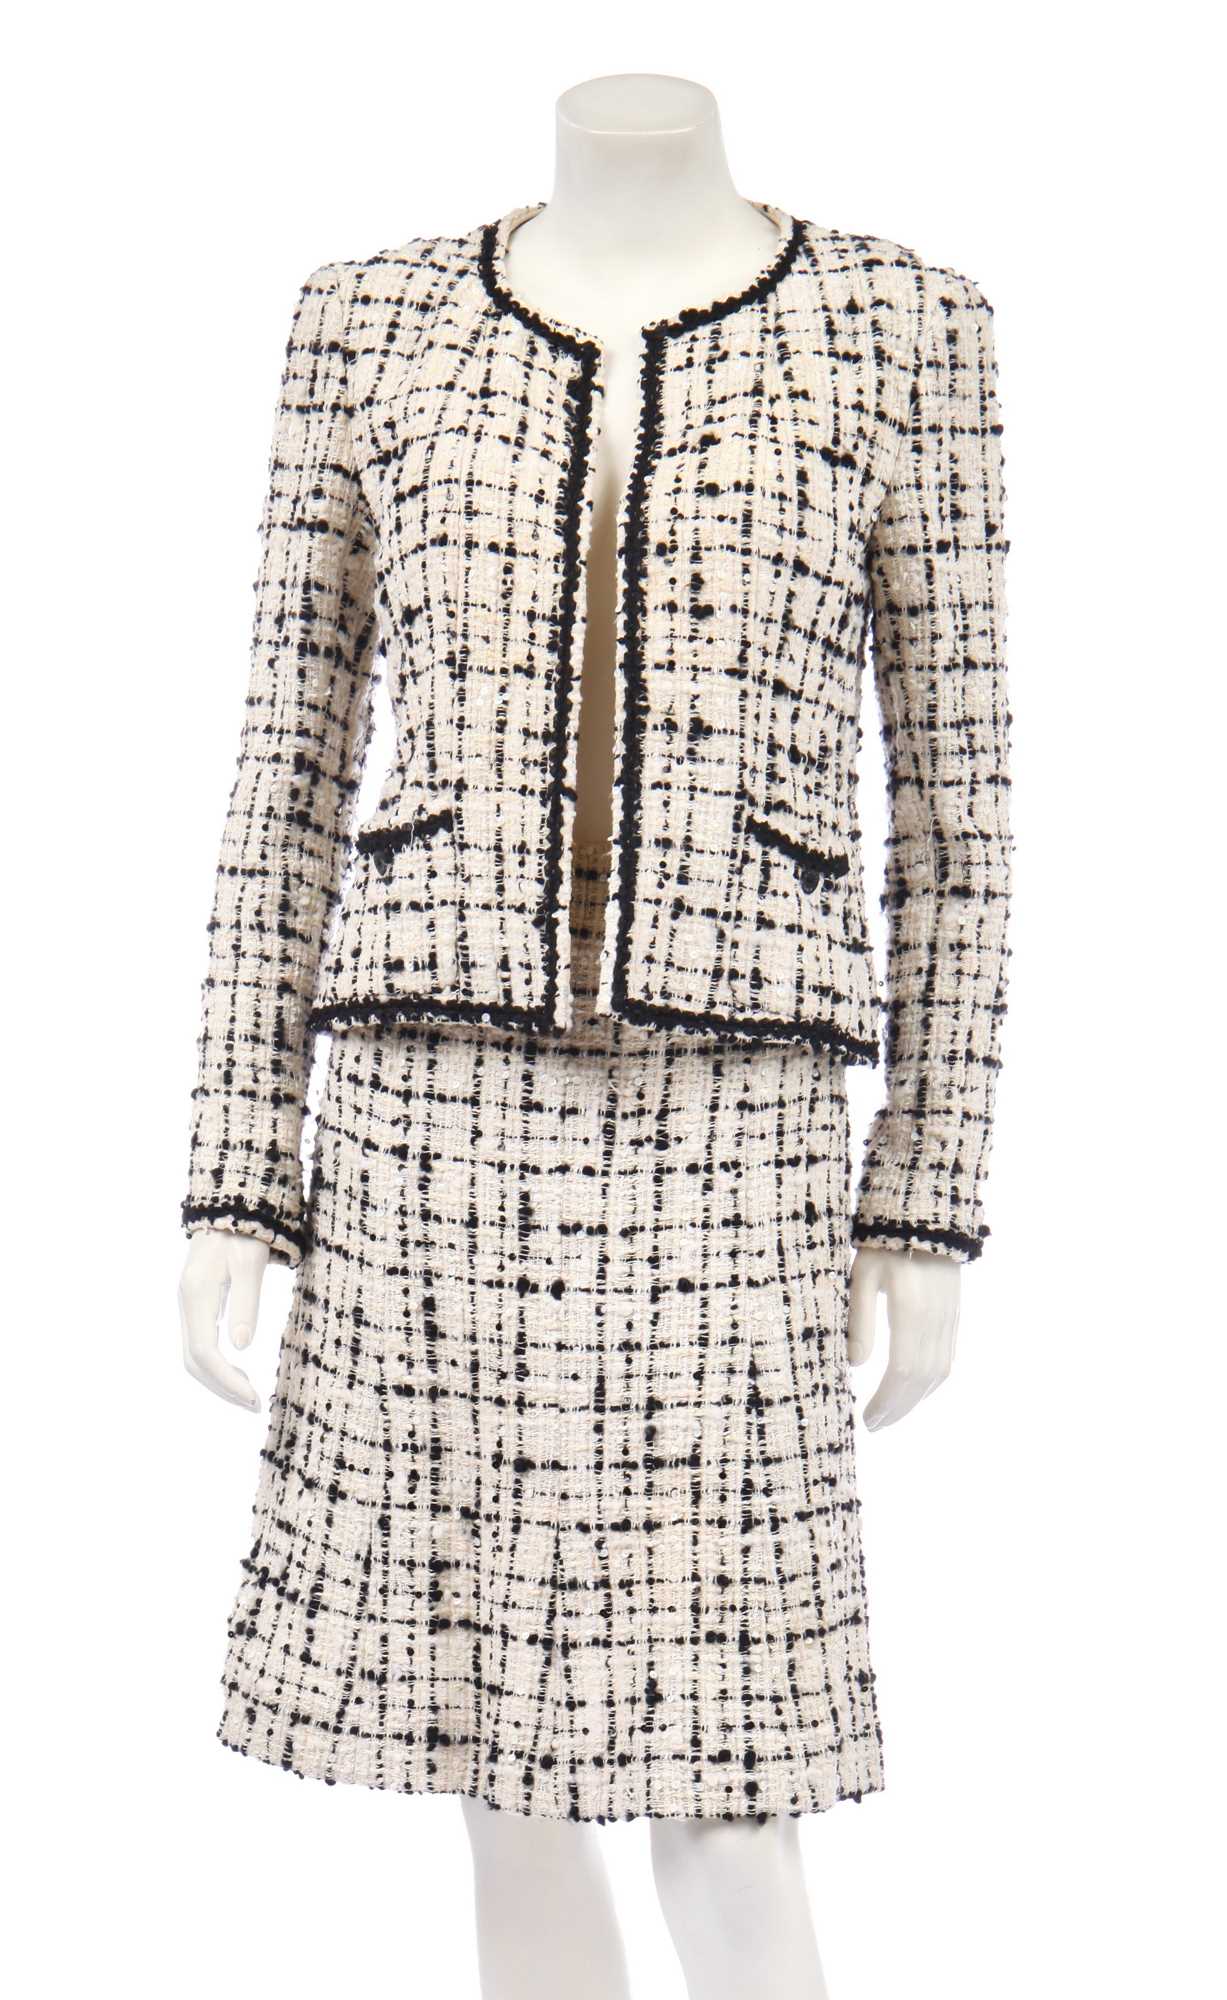 Vintage Chanel Paris Suit Tweed with Sequins - Fall 2003